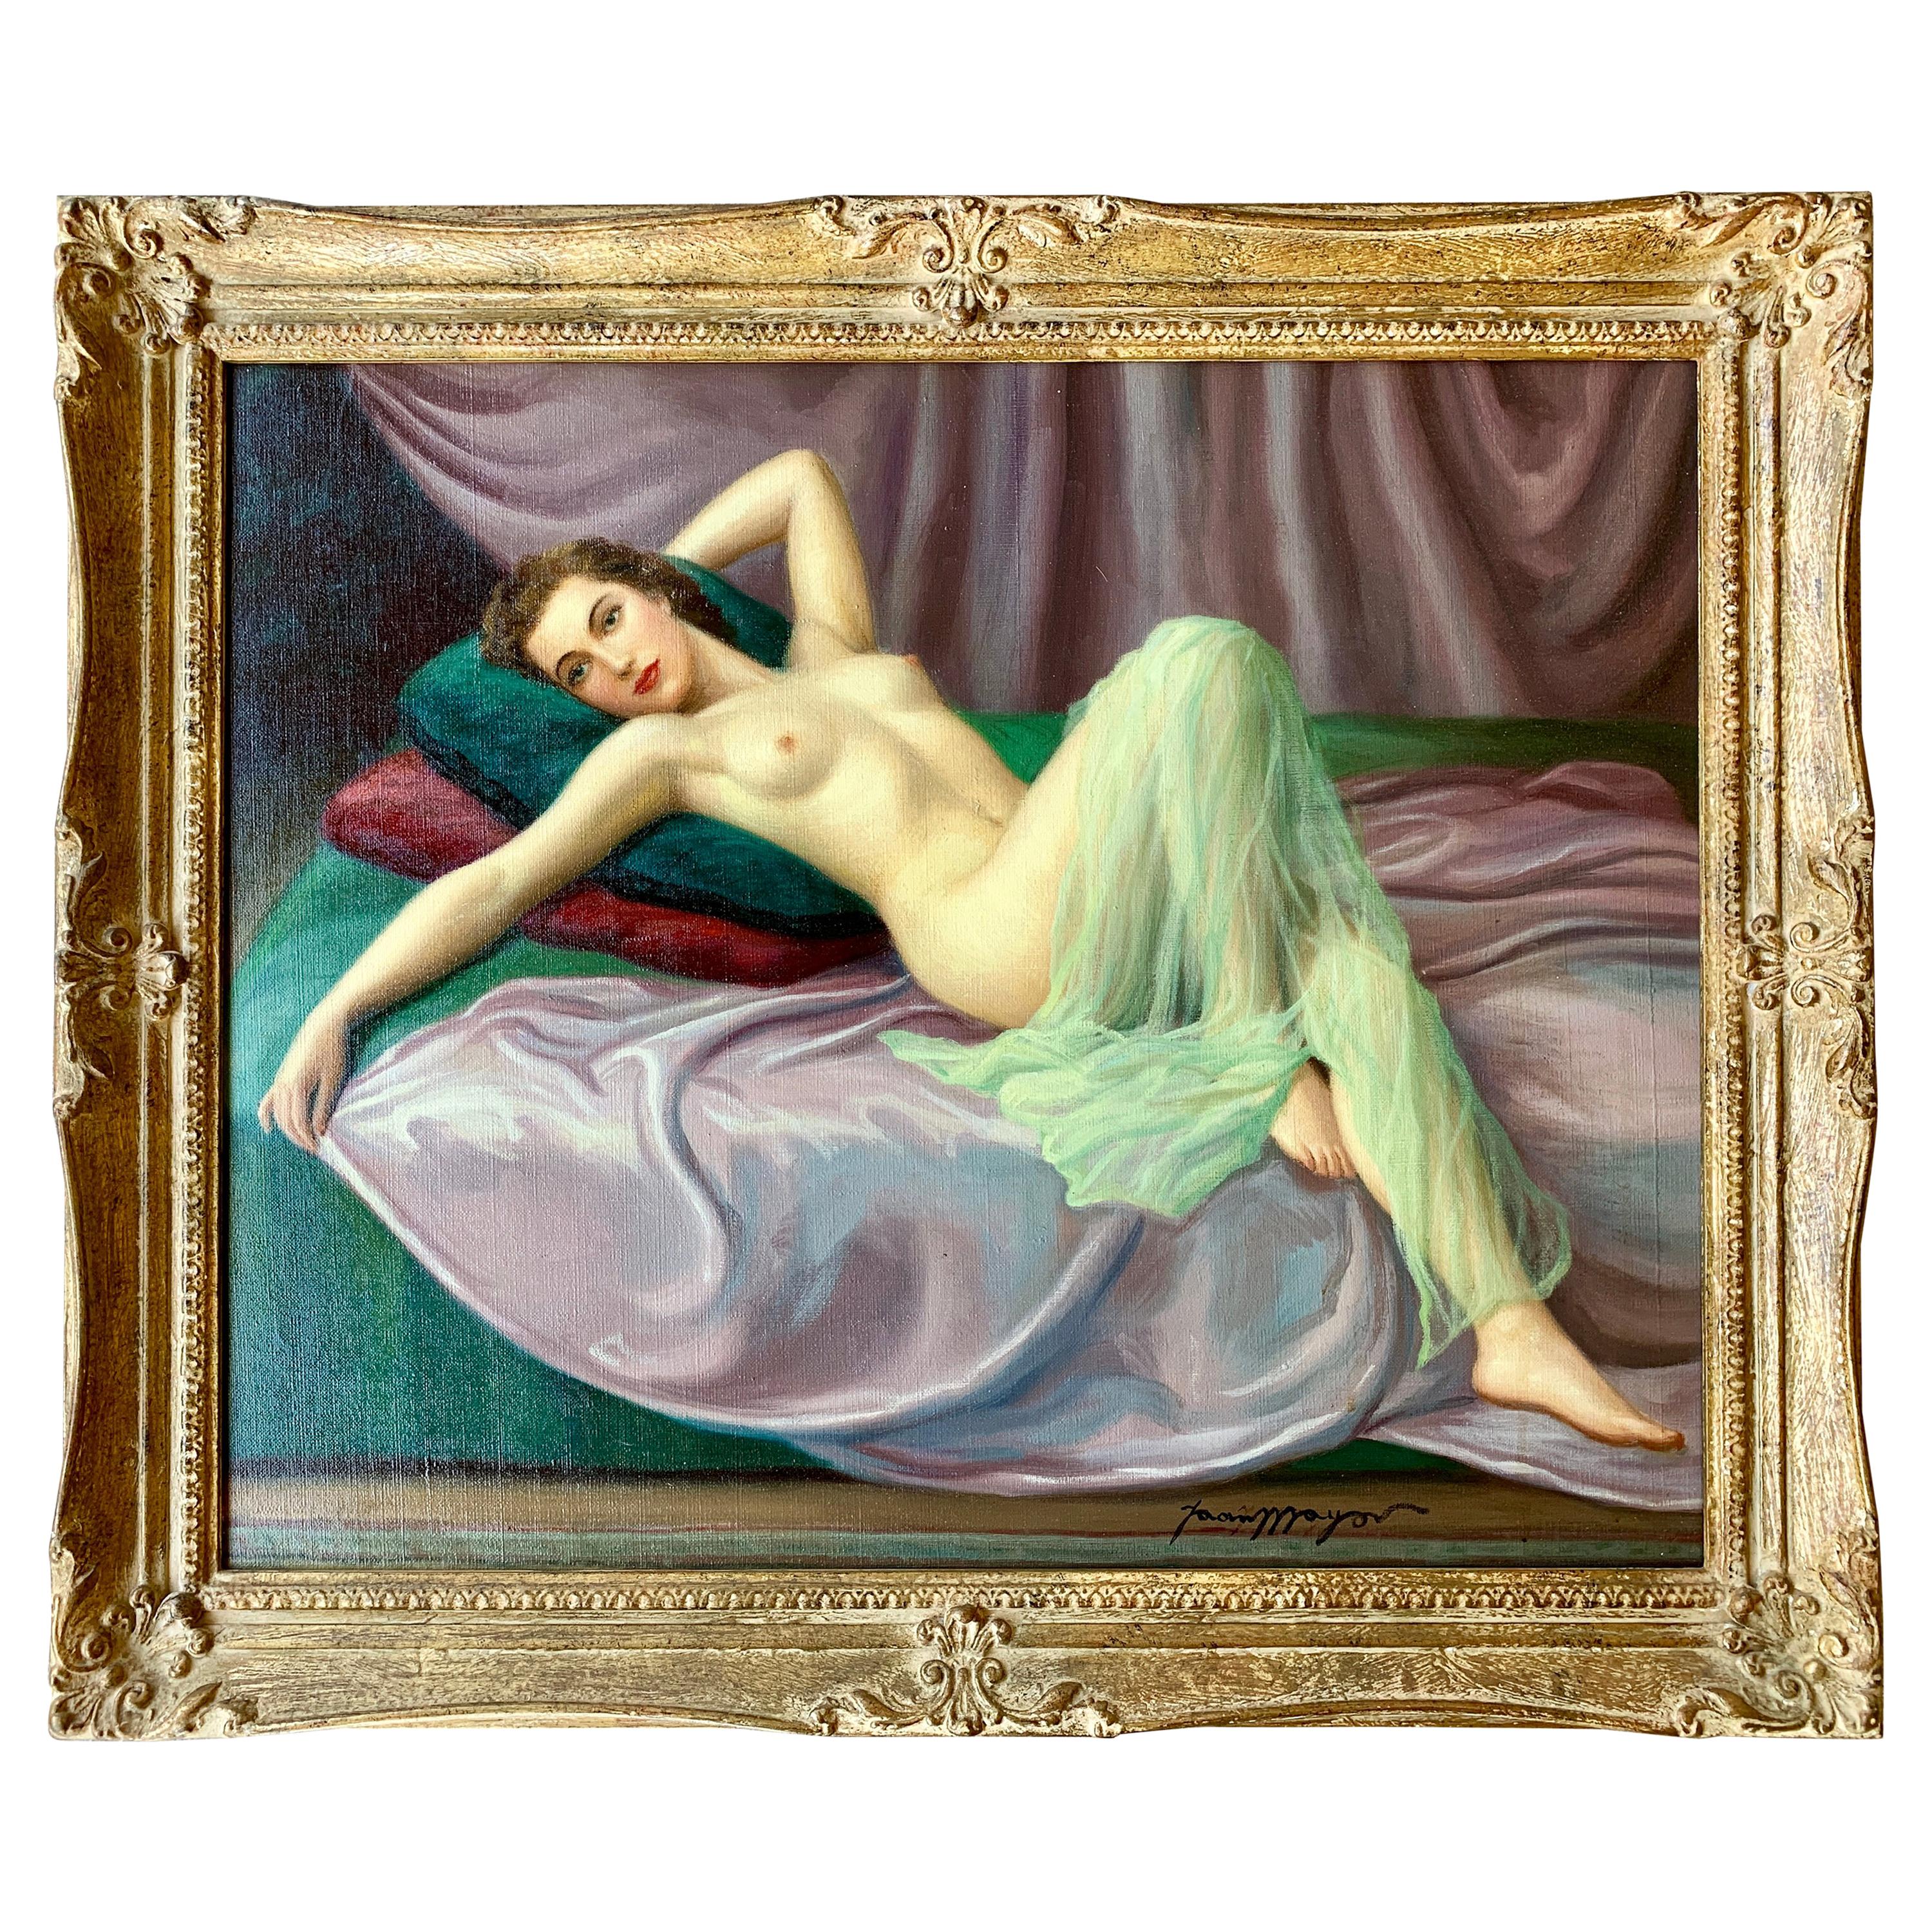 Sensual Original French Painting 1940s Reclining Nude Pin-Up Girl by Joan Mayor